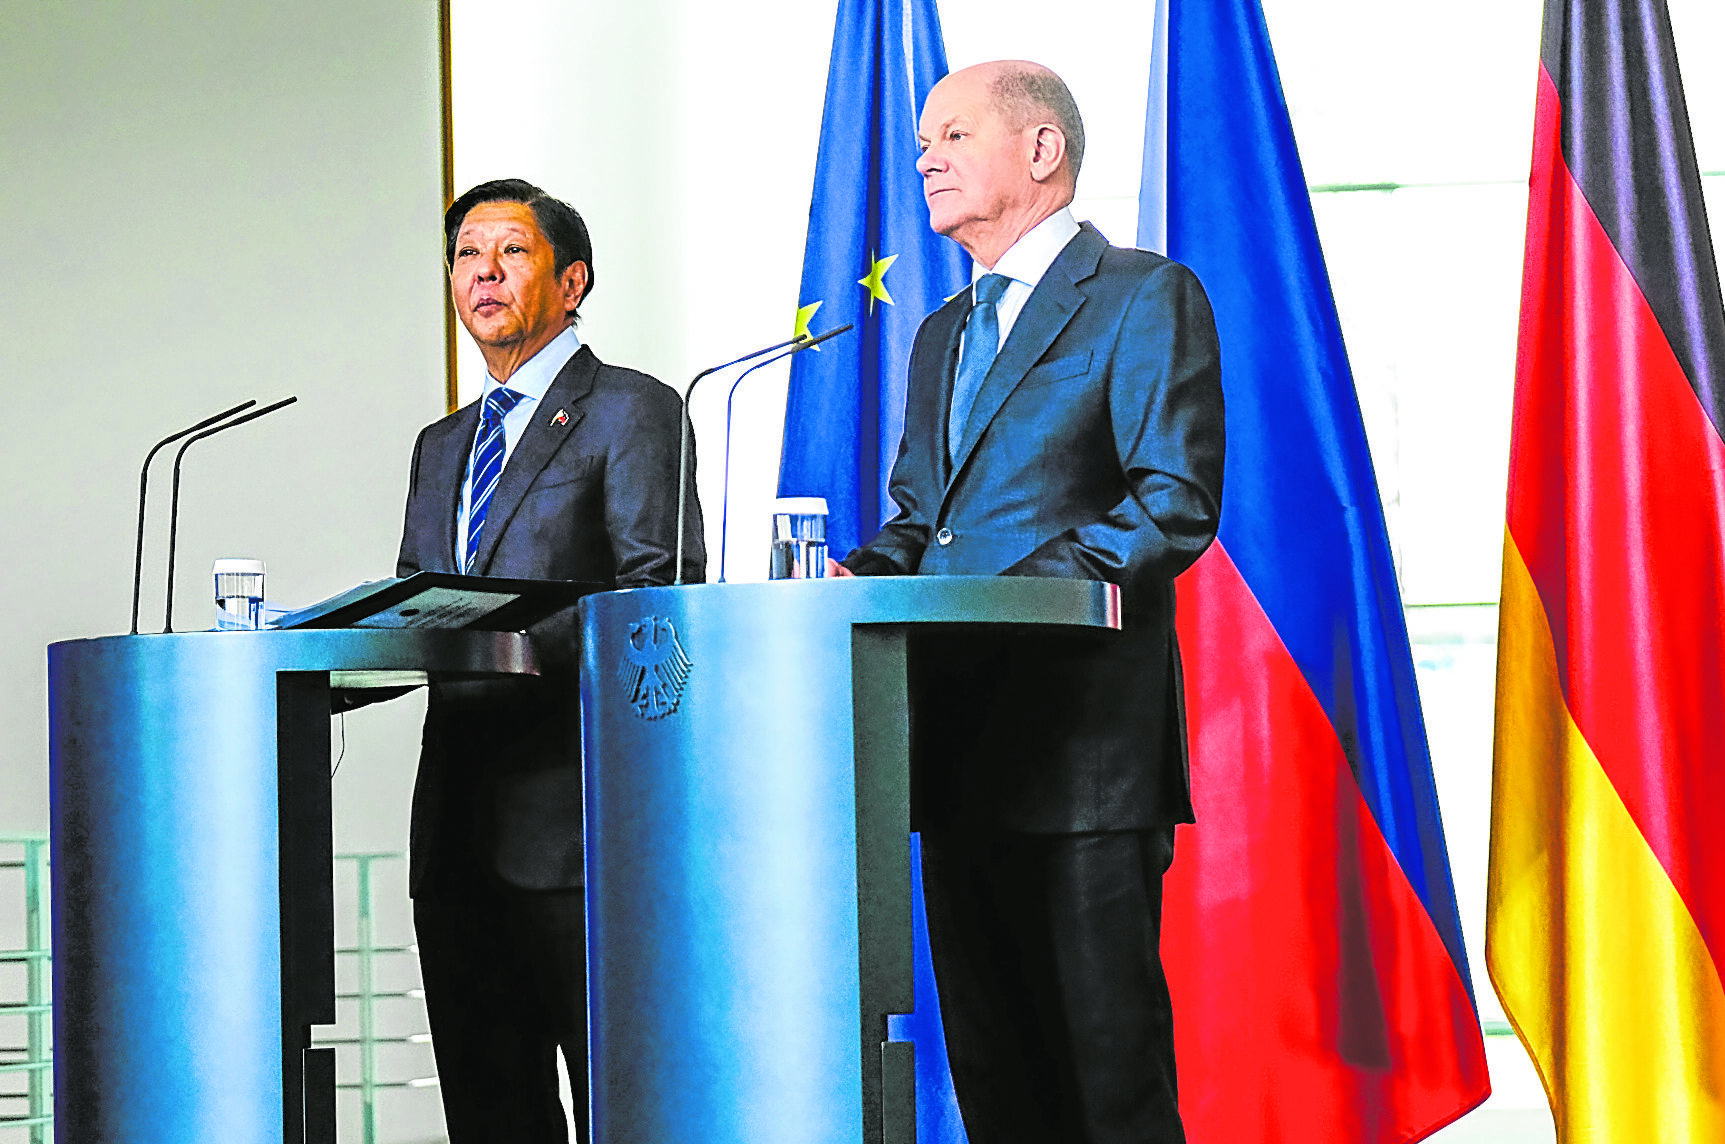 President Marcos and German Chancellor Olaf Scholz take questions from the media